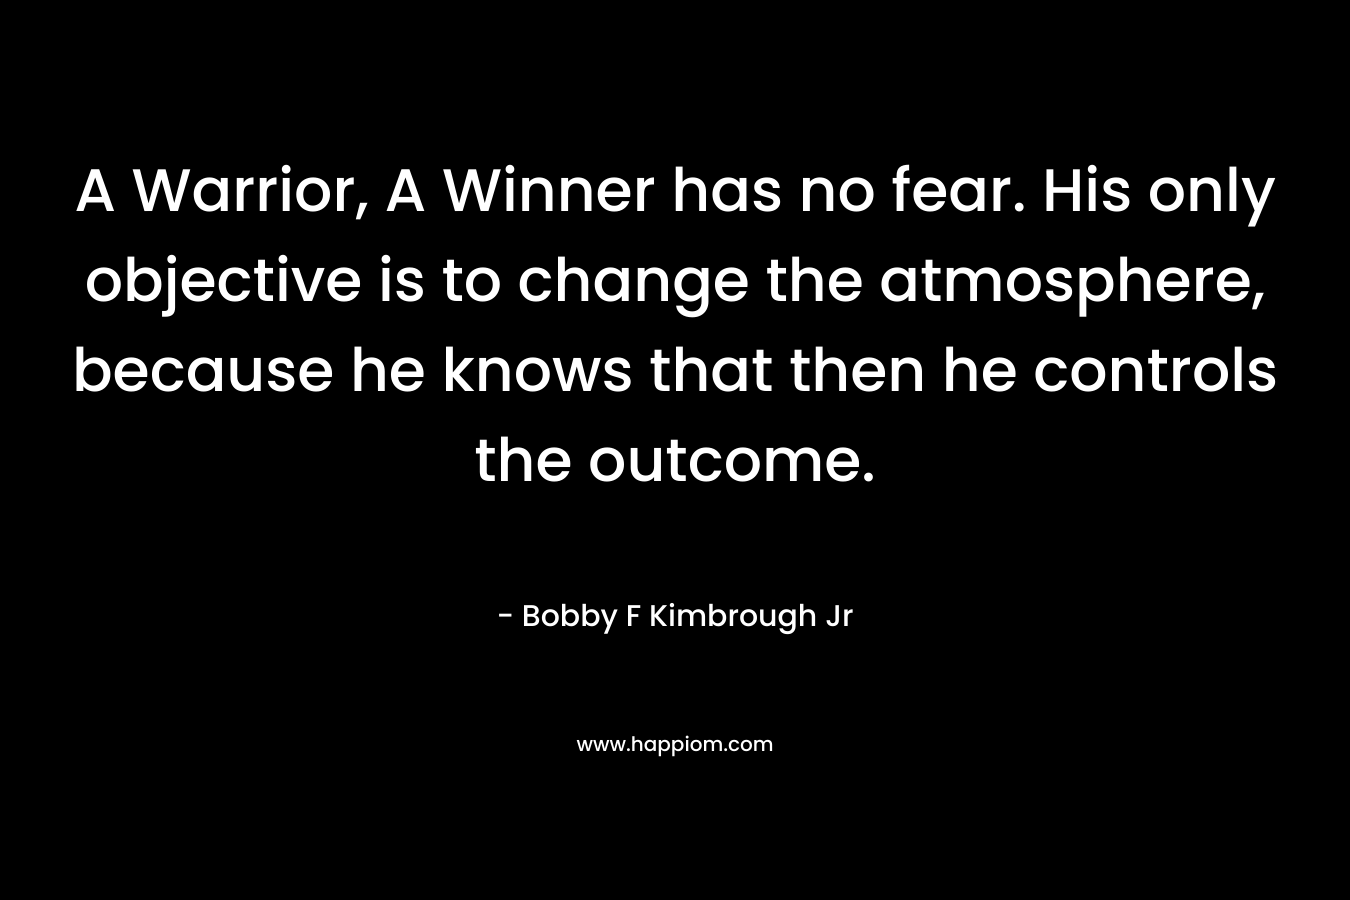 A Warrior, A Winner has no fear. His only objective is to change the atmosphere, because he knows that then he controls the outcome.